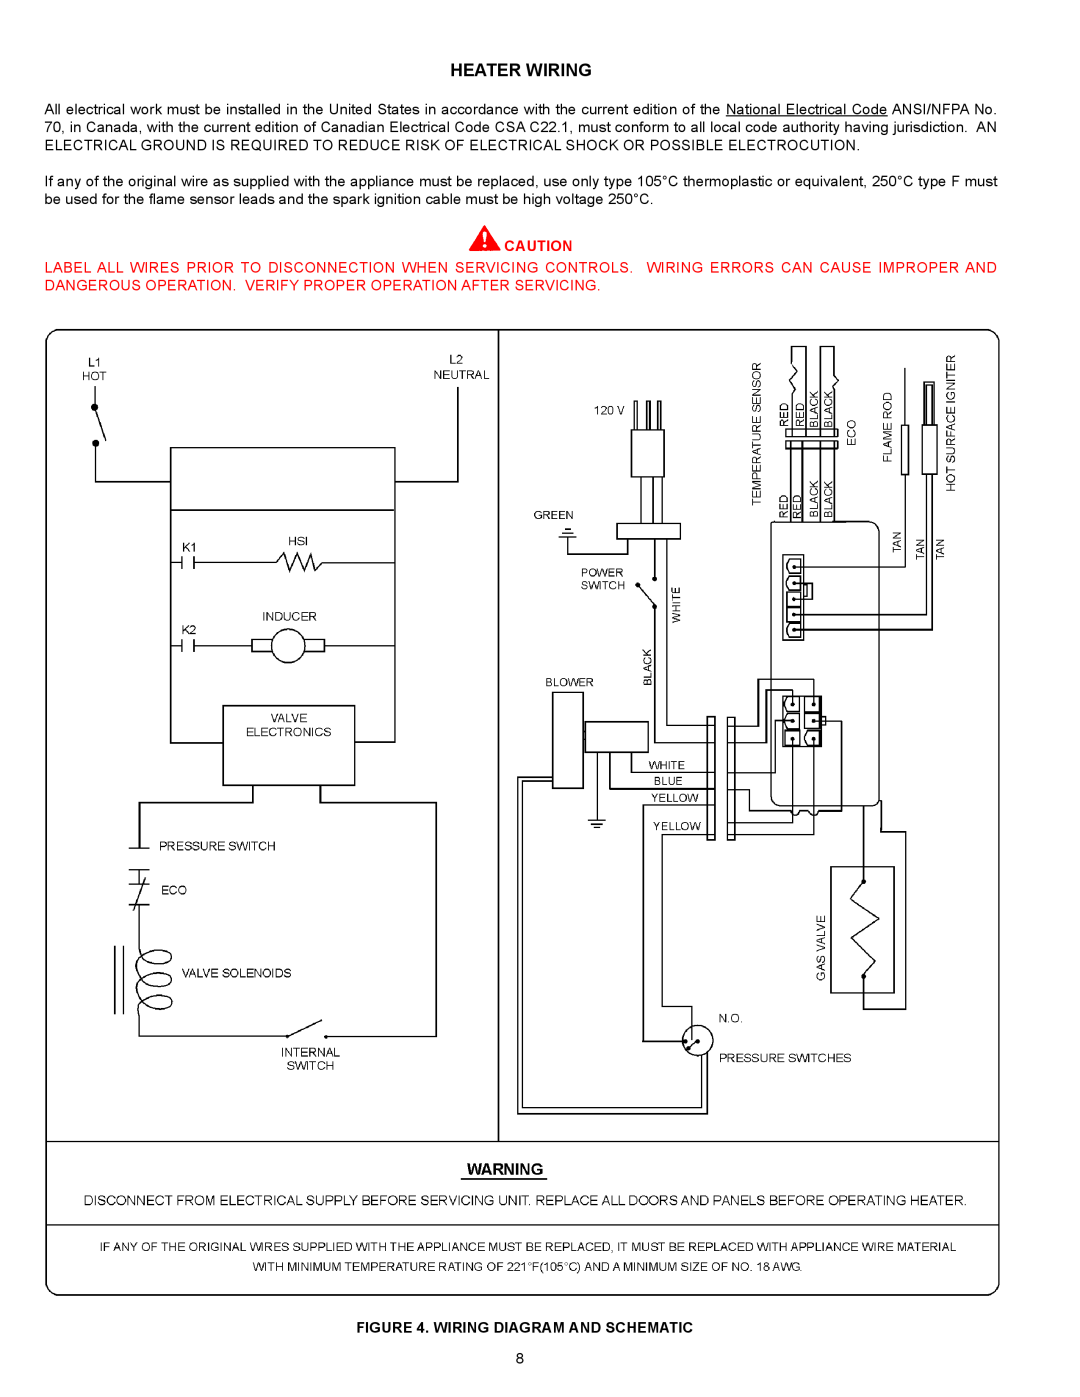 American Water Heater BBCN375T754NV, Commercial Ultra Low NOx Gas water Heater Heater Wiring, Wiring Diagram And Schematic 